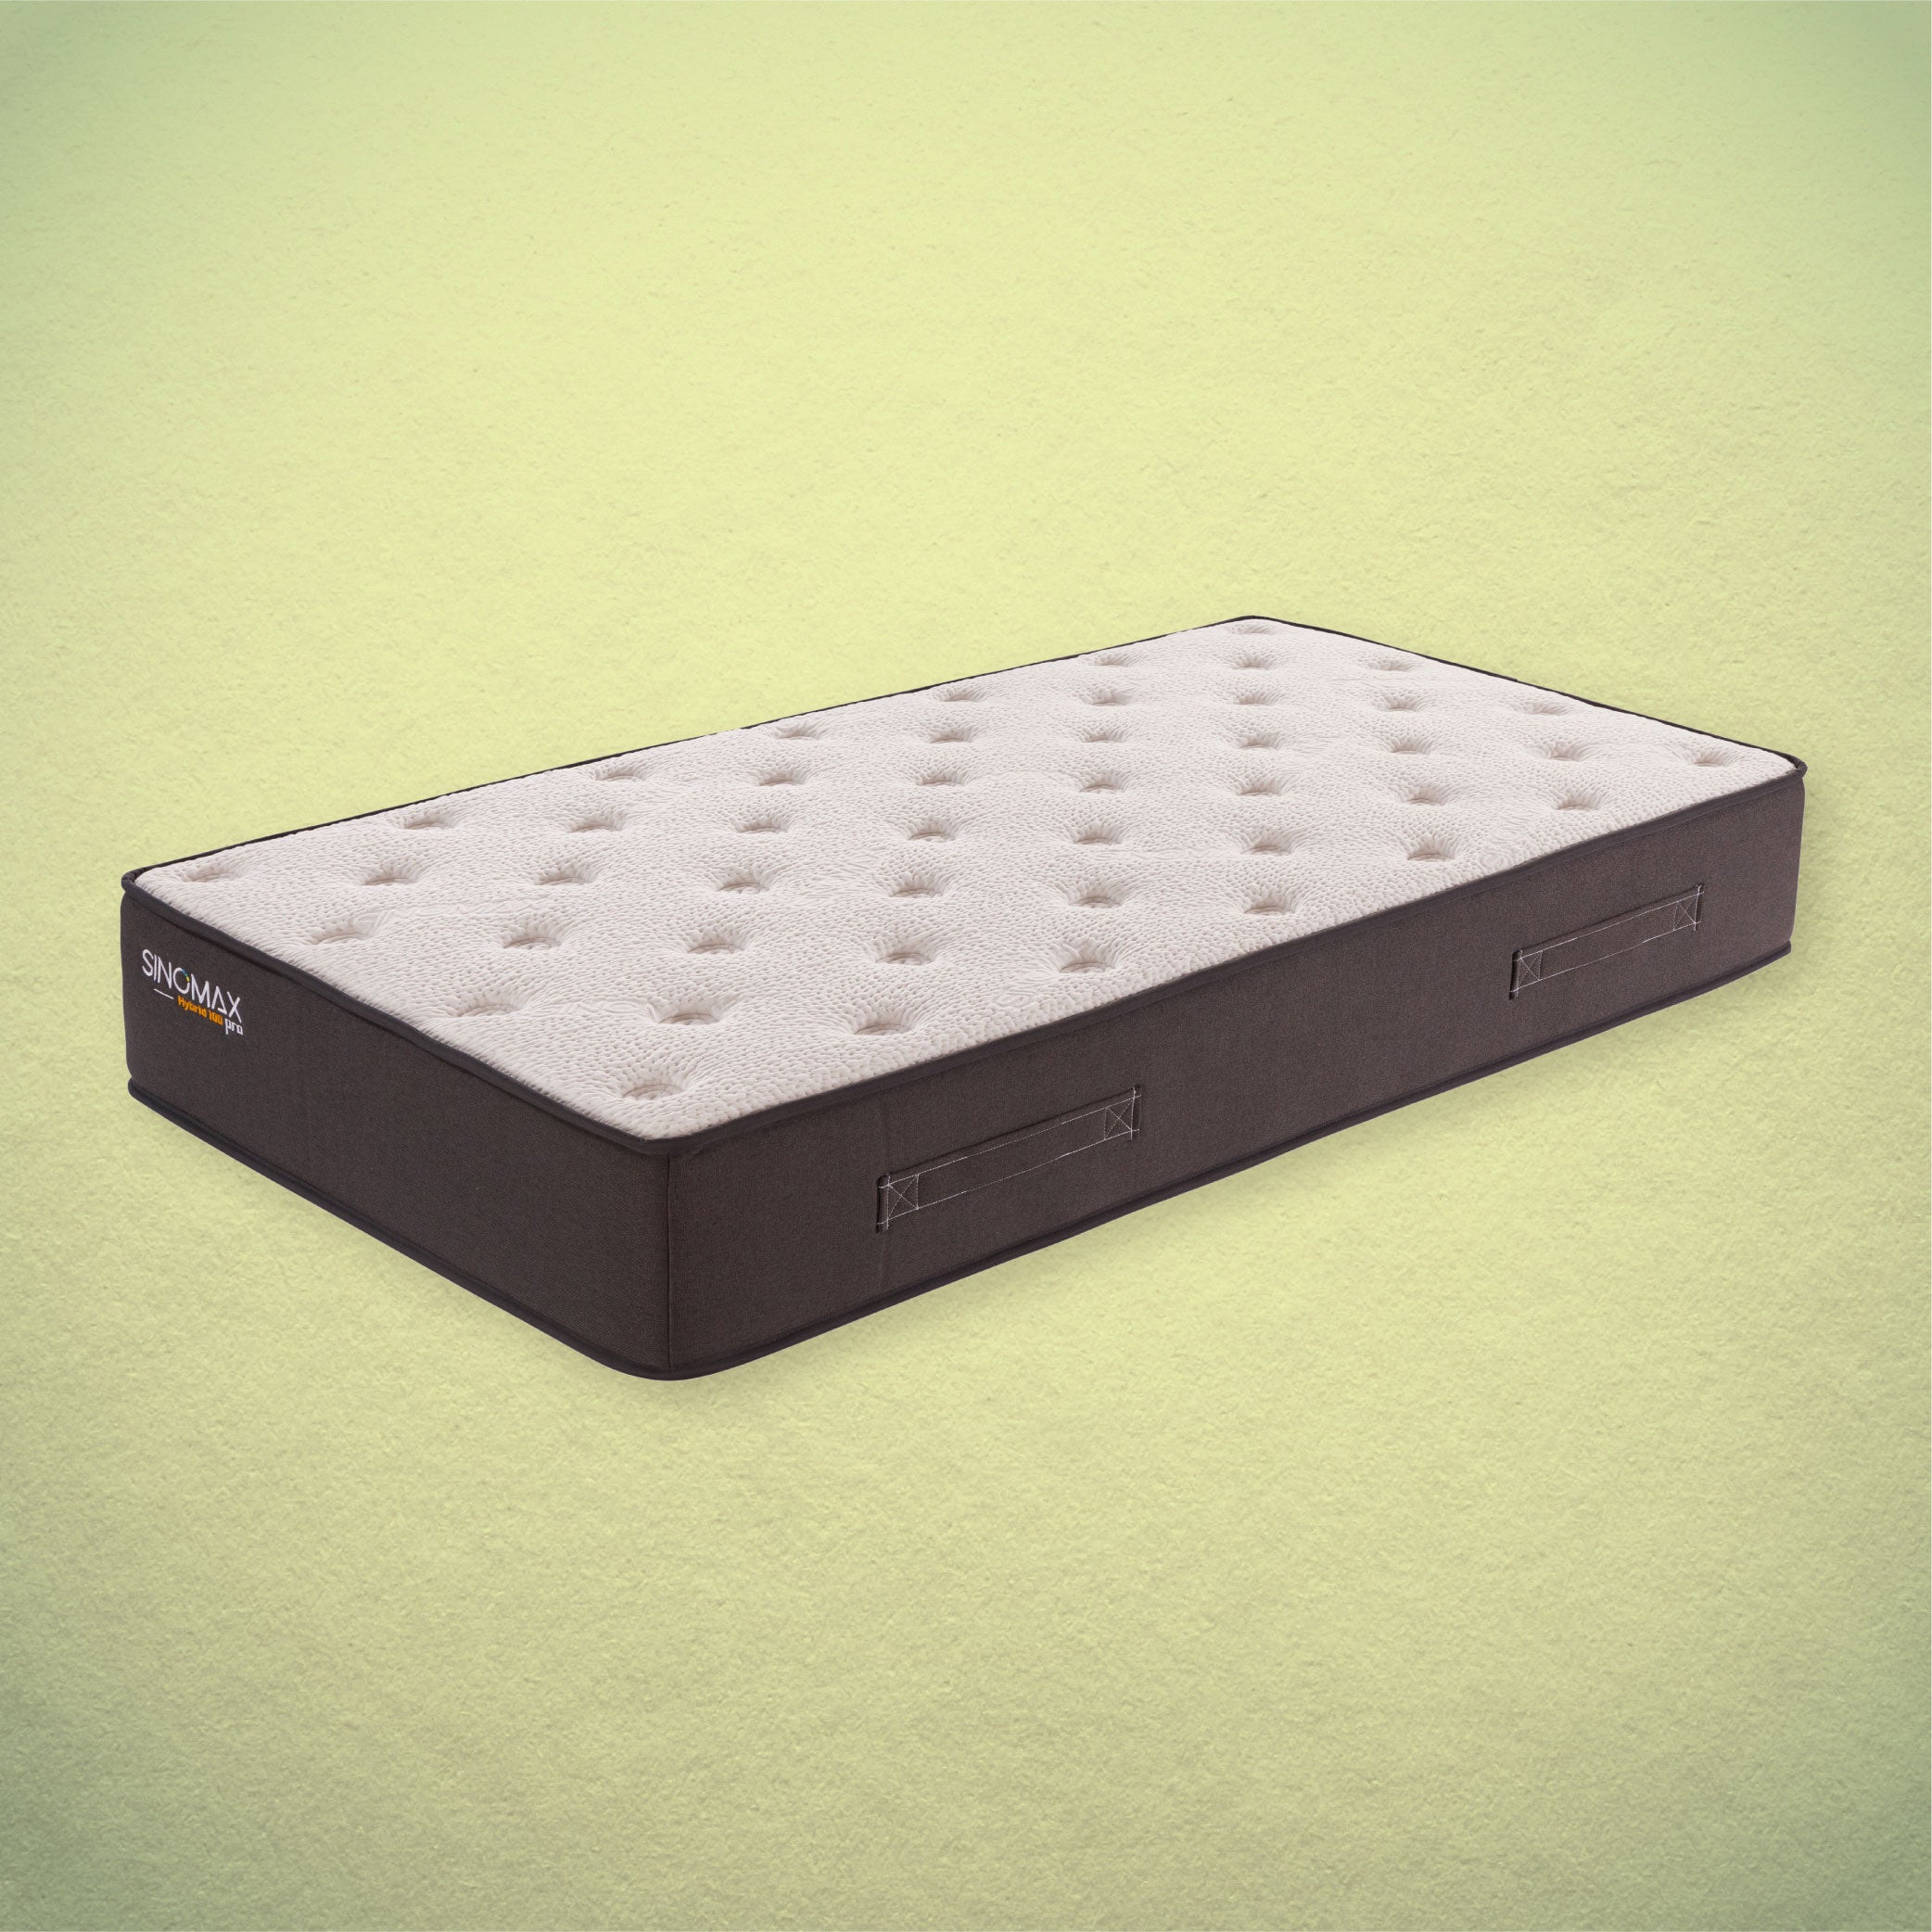 Hybrid 100 Pro Mattress - Tailor-made Size (48"W or below)